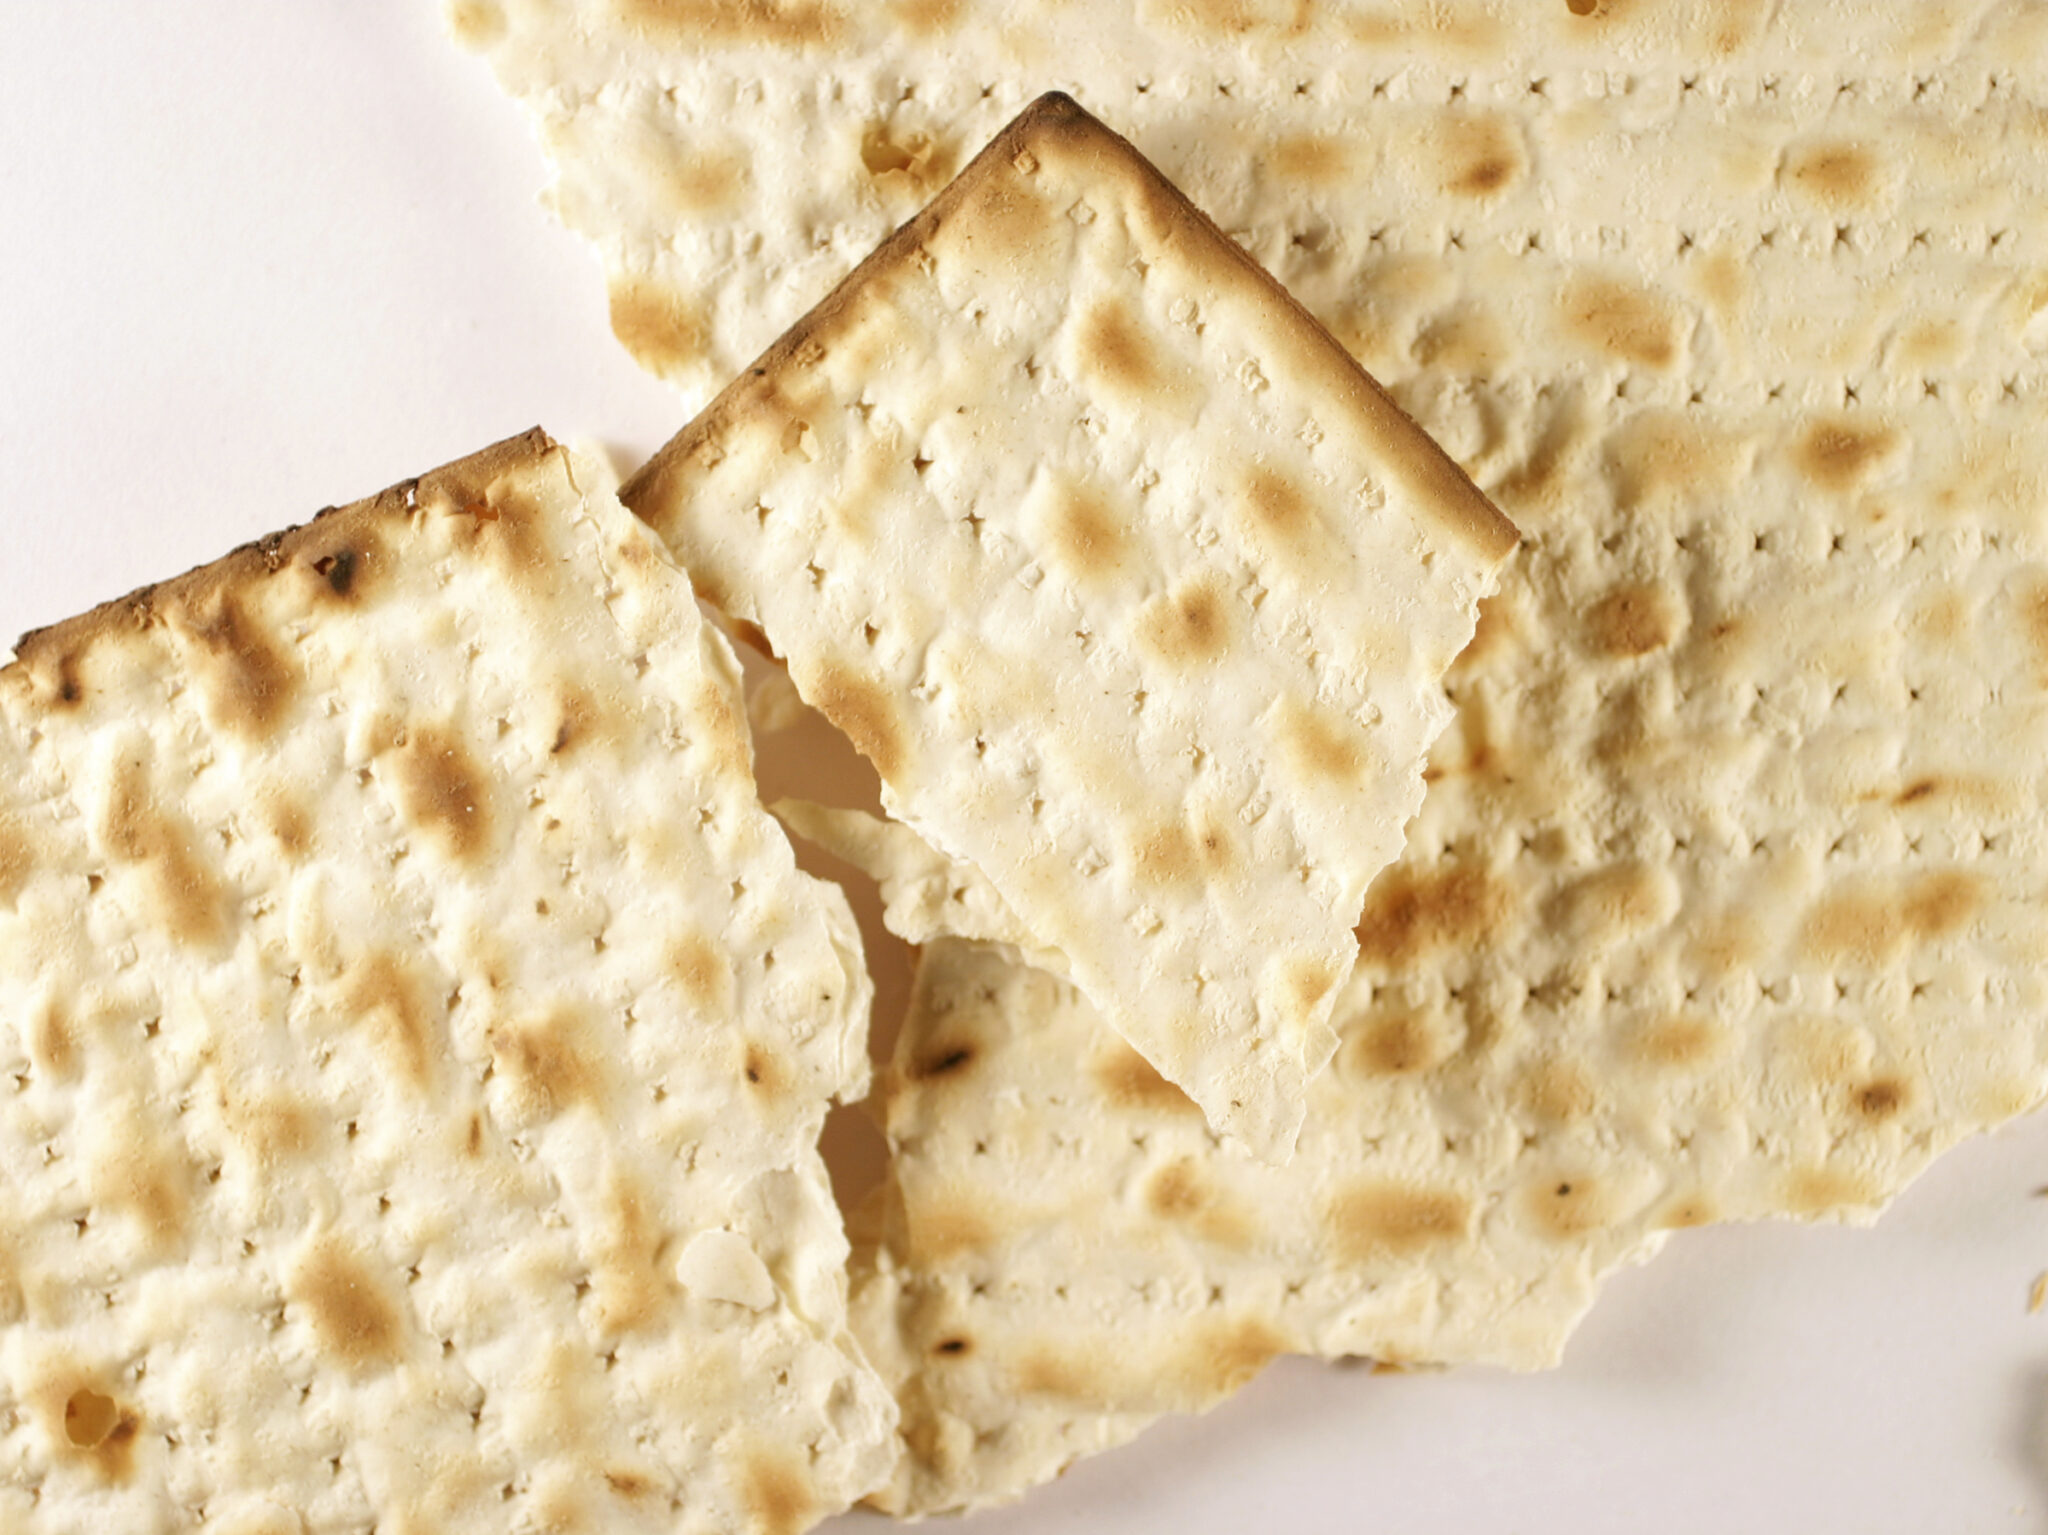 Why Do Crackers and Matzos Have All Those Little Holes In Them?